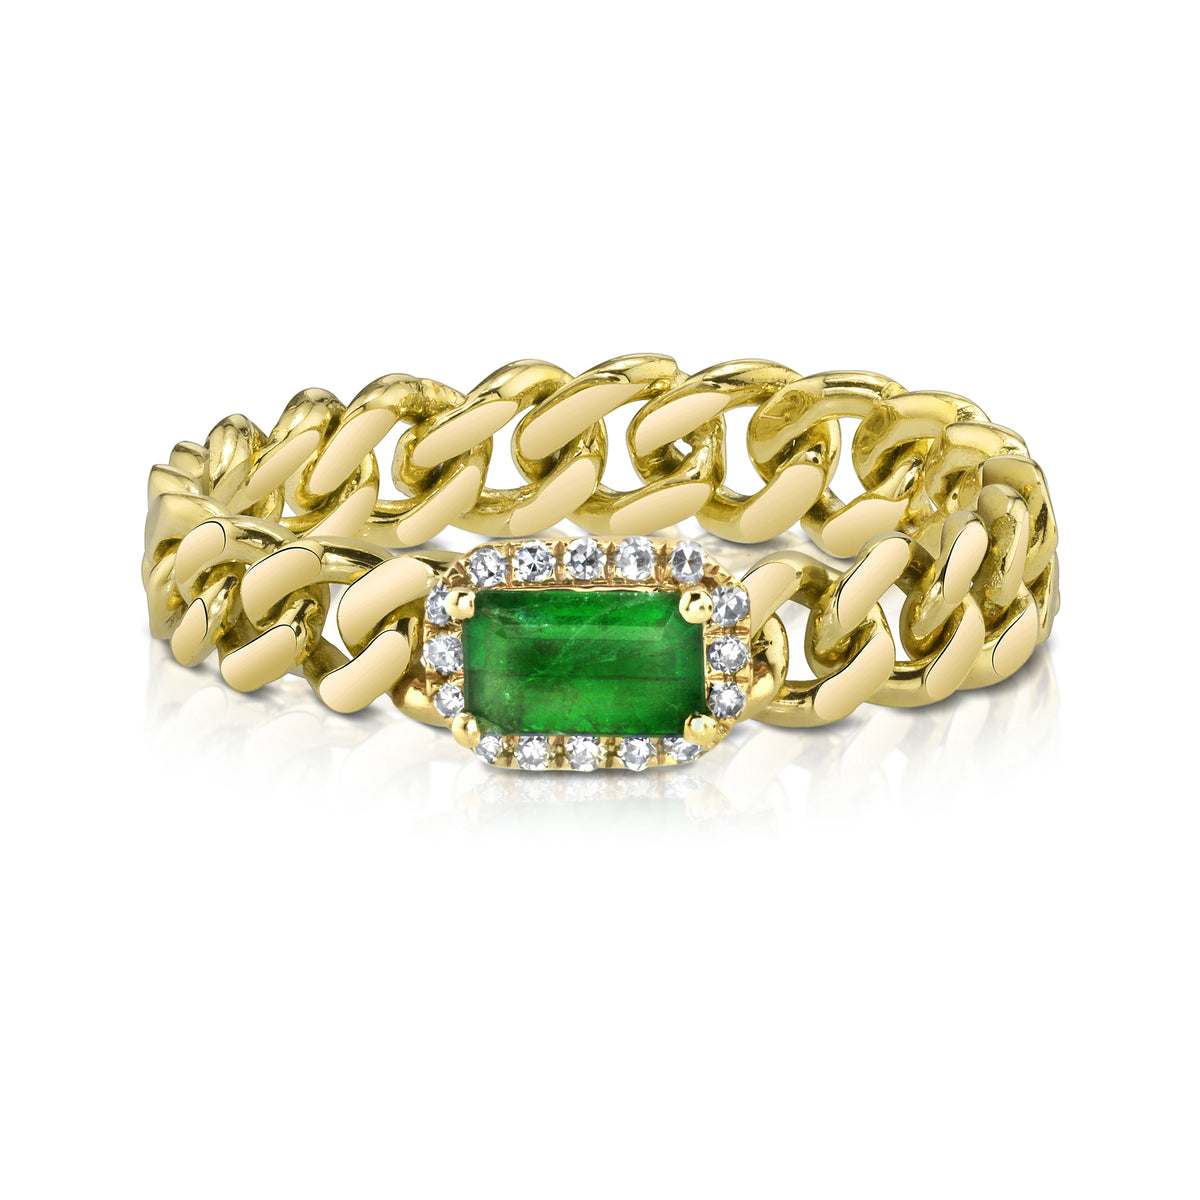 READY TO SHIP EMERALD RECTANGLE BABY LINK RING